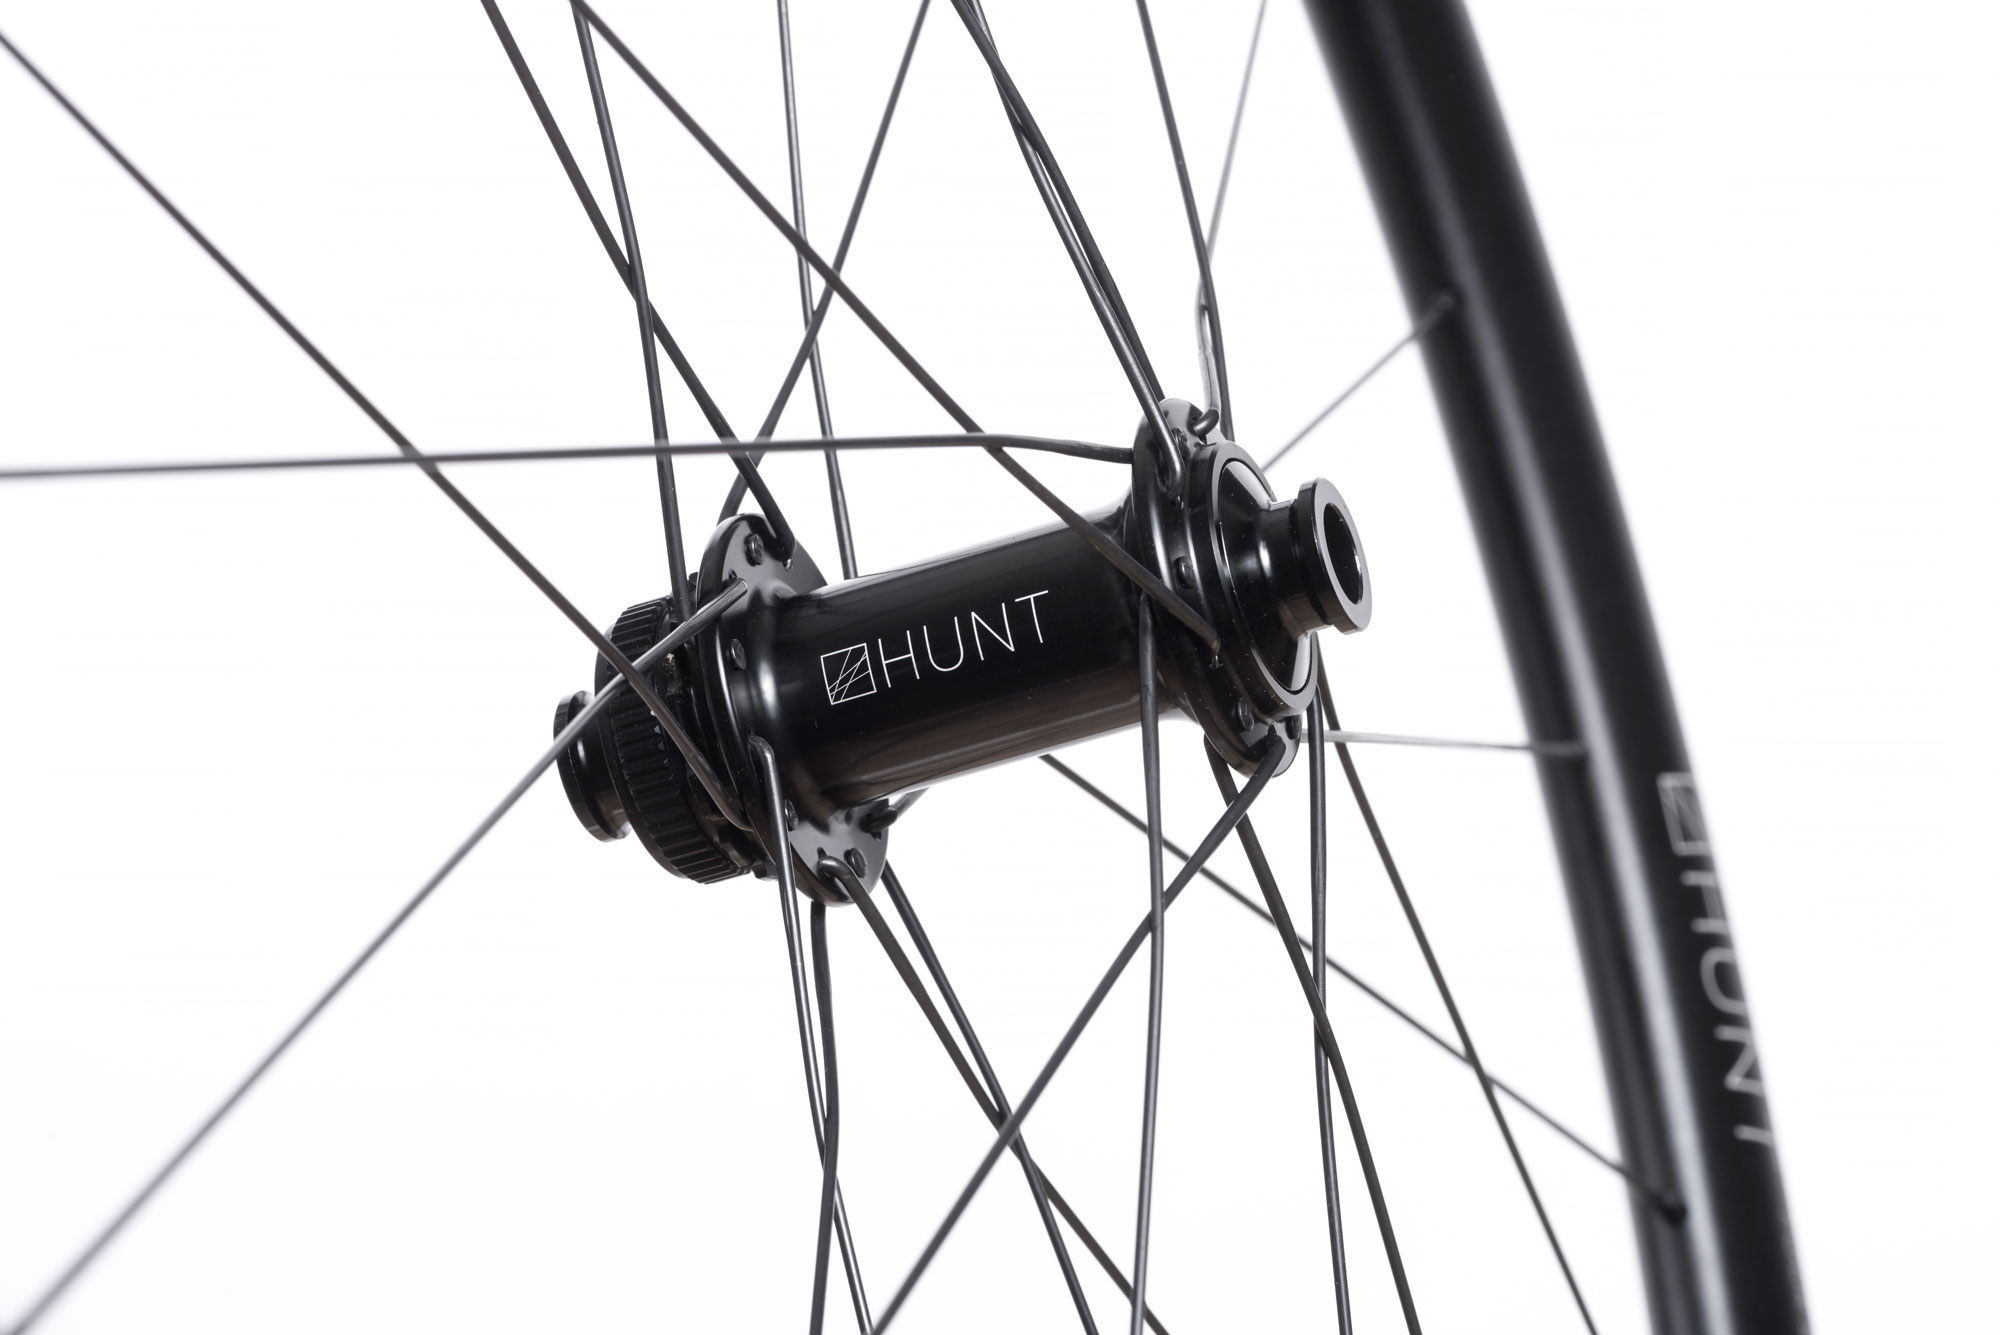 J-bend standard spokes stand for function without frills. Nevertheless, hubs with high-quality bearings are used. Incidentally, the hunt 4 season pro wheelset can be converted for all possible axle standards.